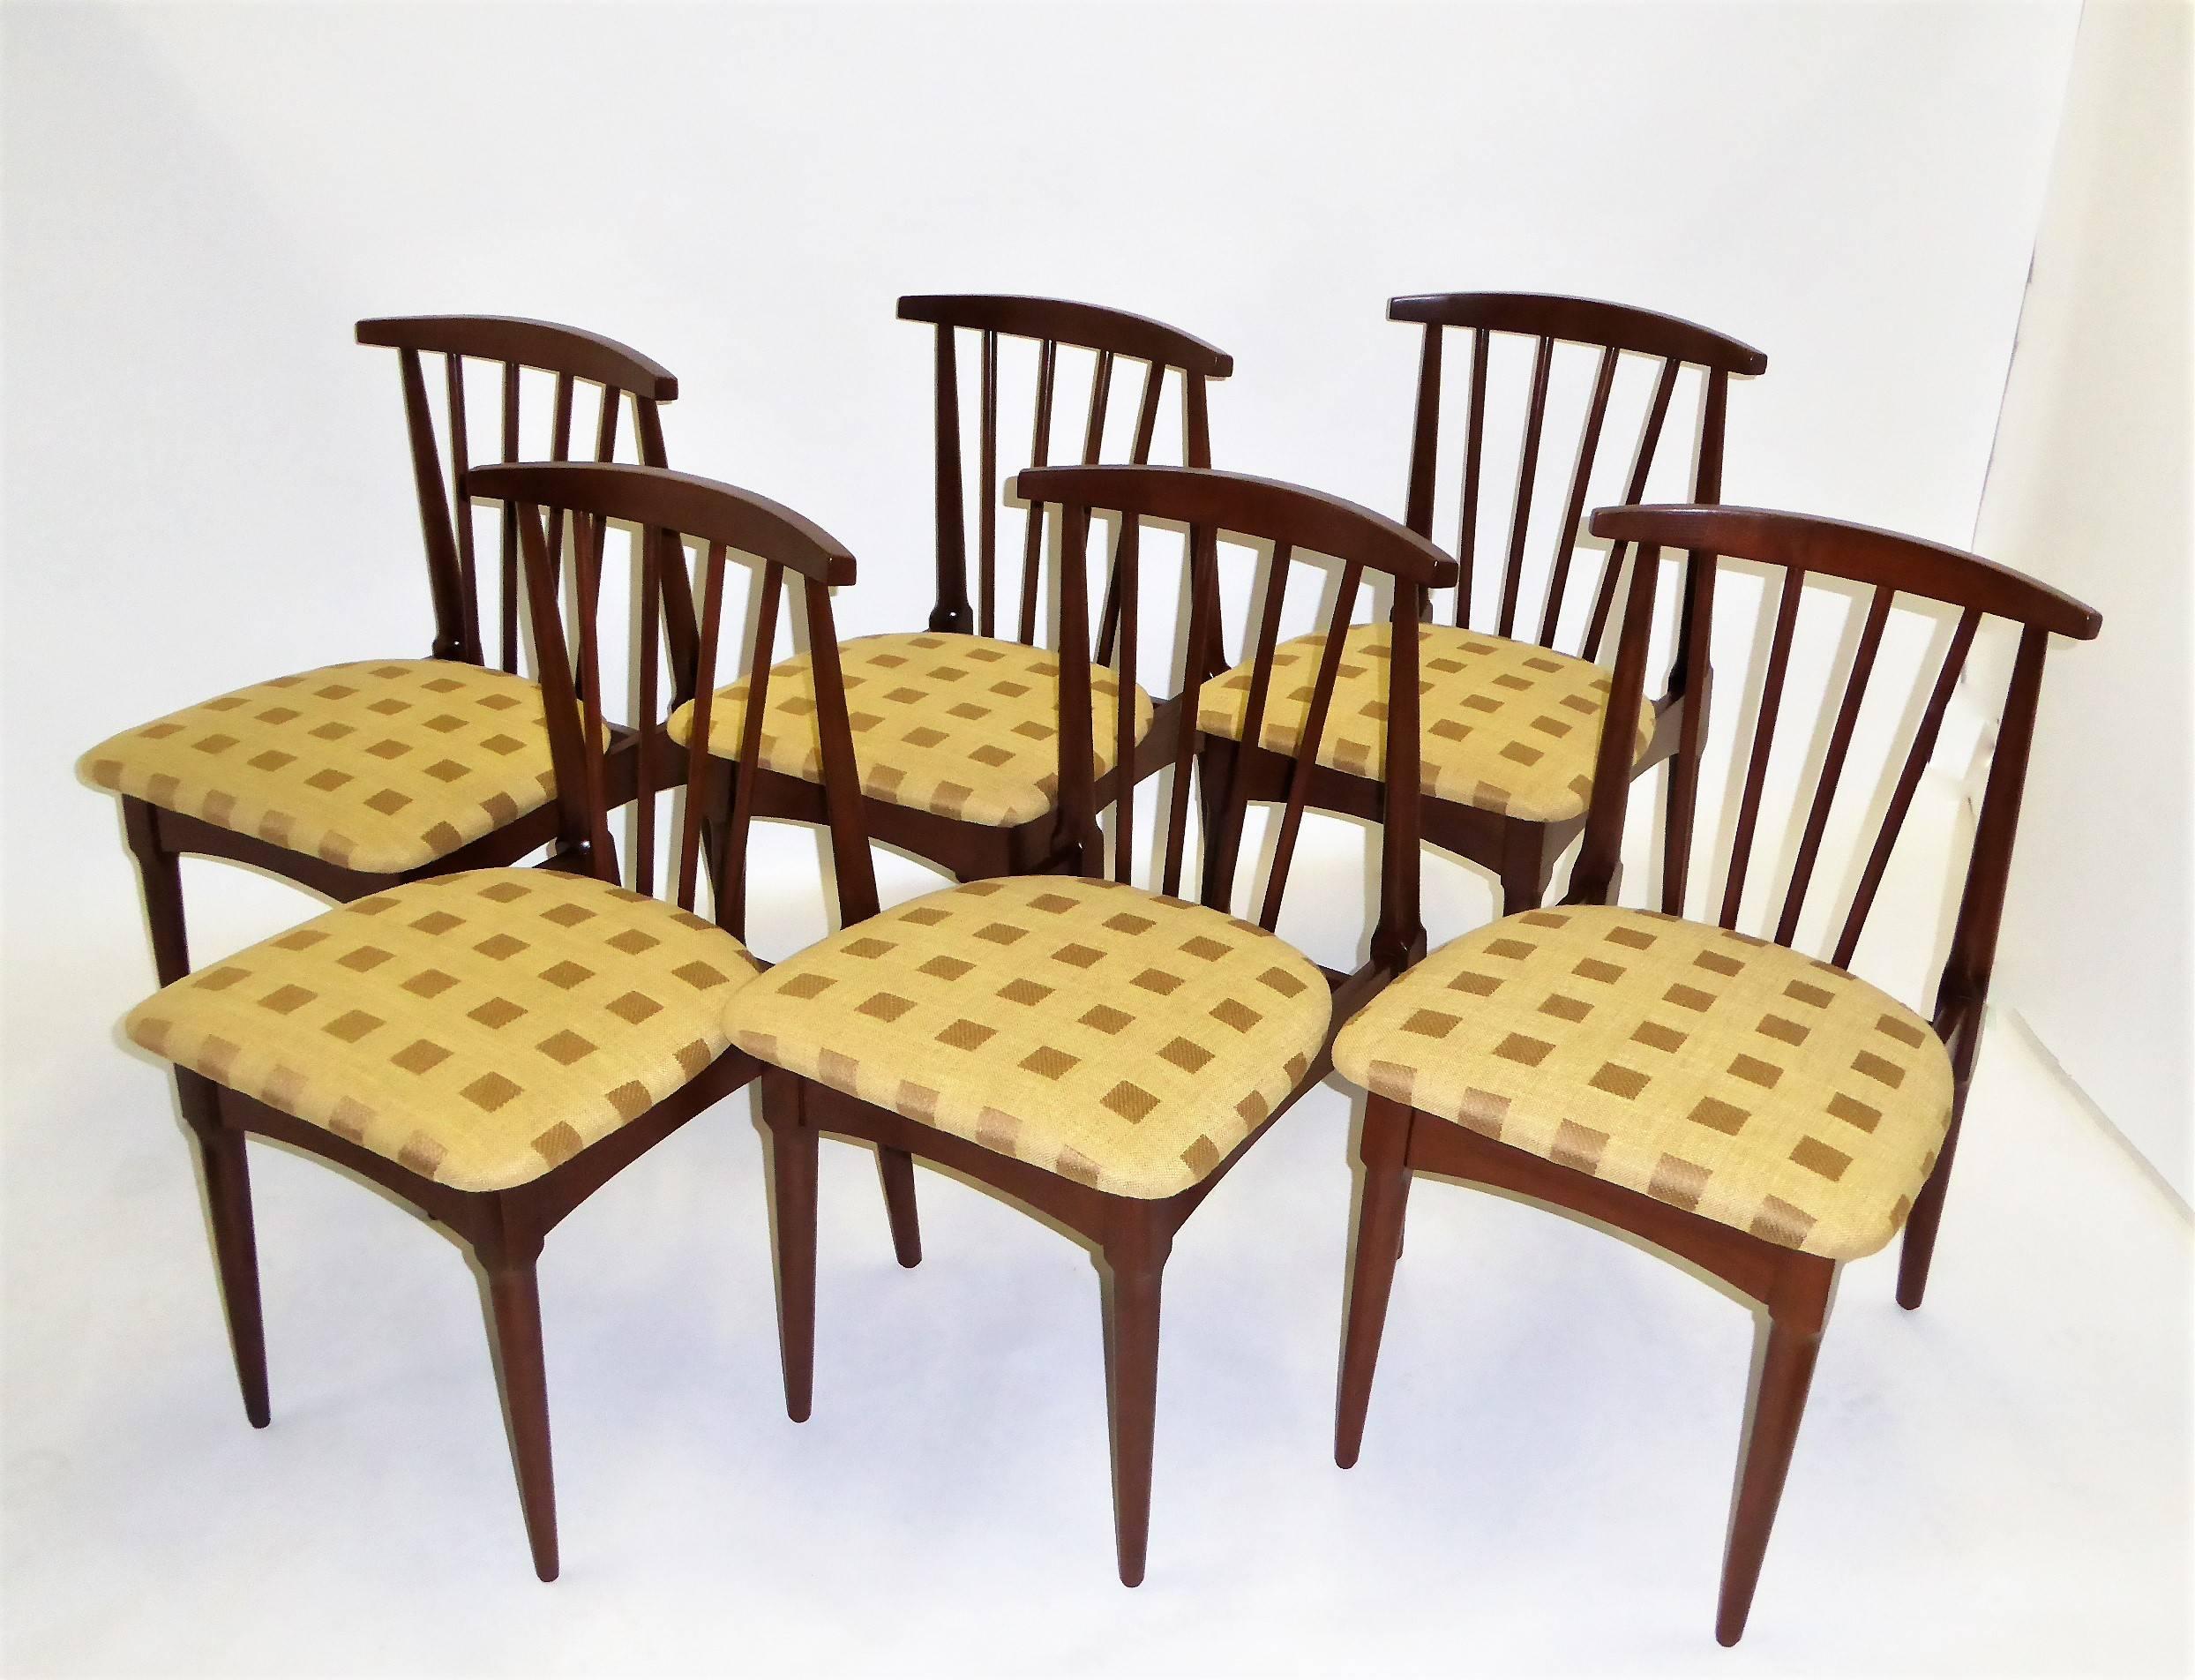 Six 1950s Mid-Century Modern walnut spindle back dining chairs. Danish modern styling and similar to Tomlinson Sophisticates Line, these beauties have been restored and have plush re-upholstered seats in a neutral woven fabric. All strong and